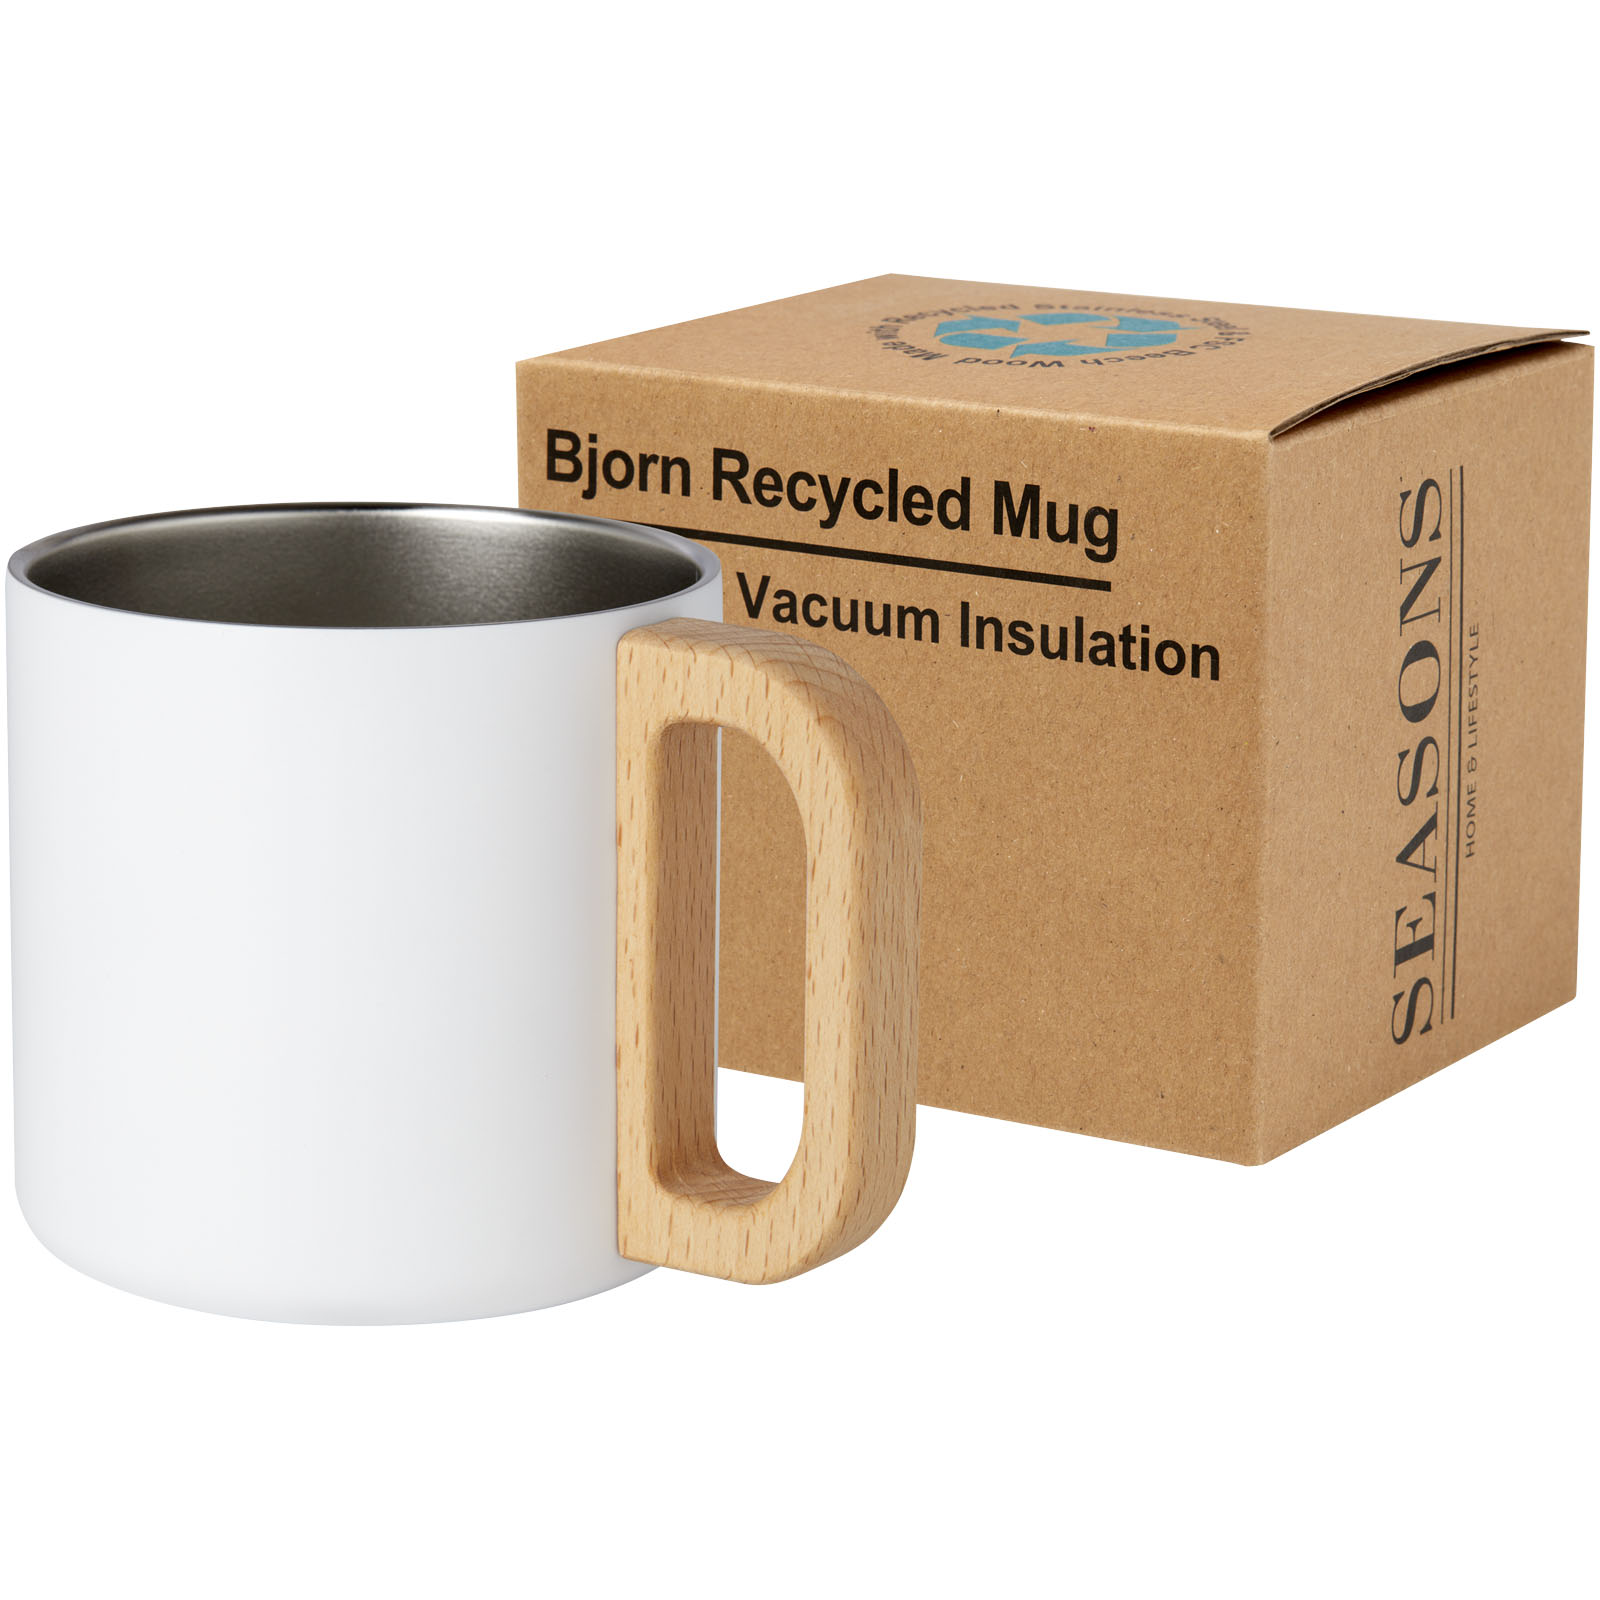 Advertising Insulated mugs - Bjorn 360 ml RCS certified recycled stainless steel mug with copper vacuum insulation - 0